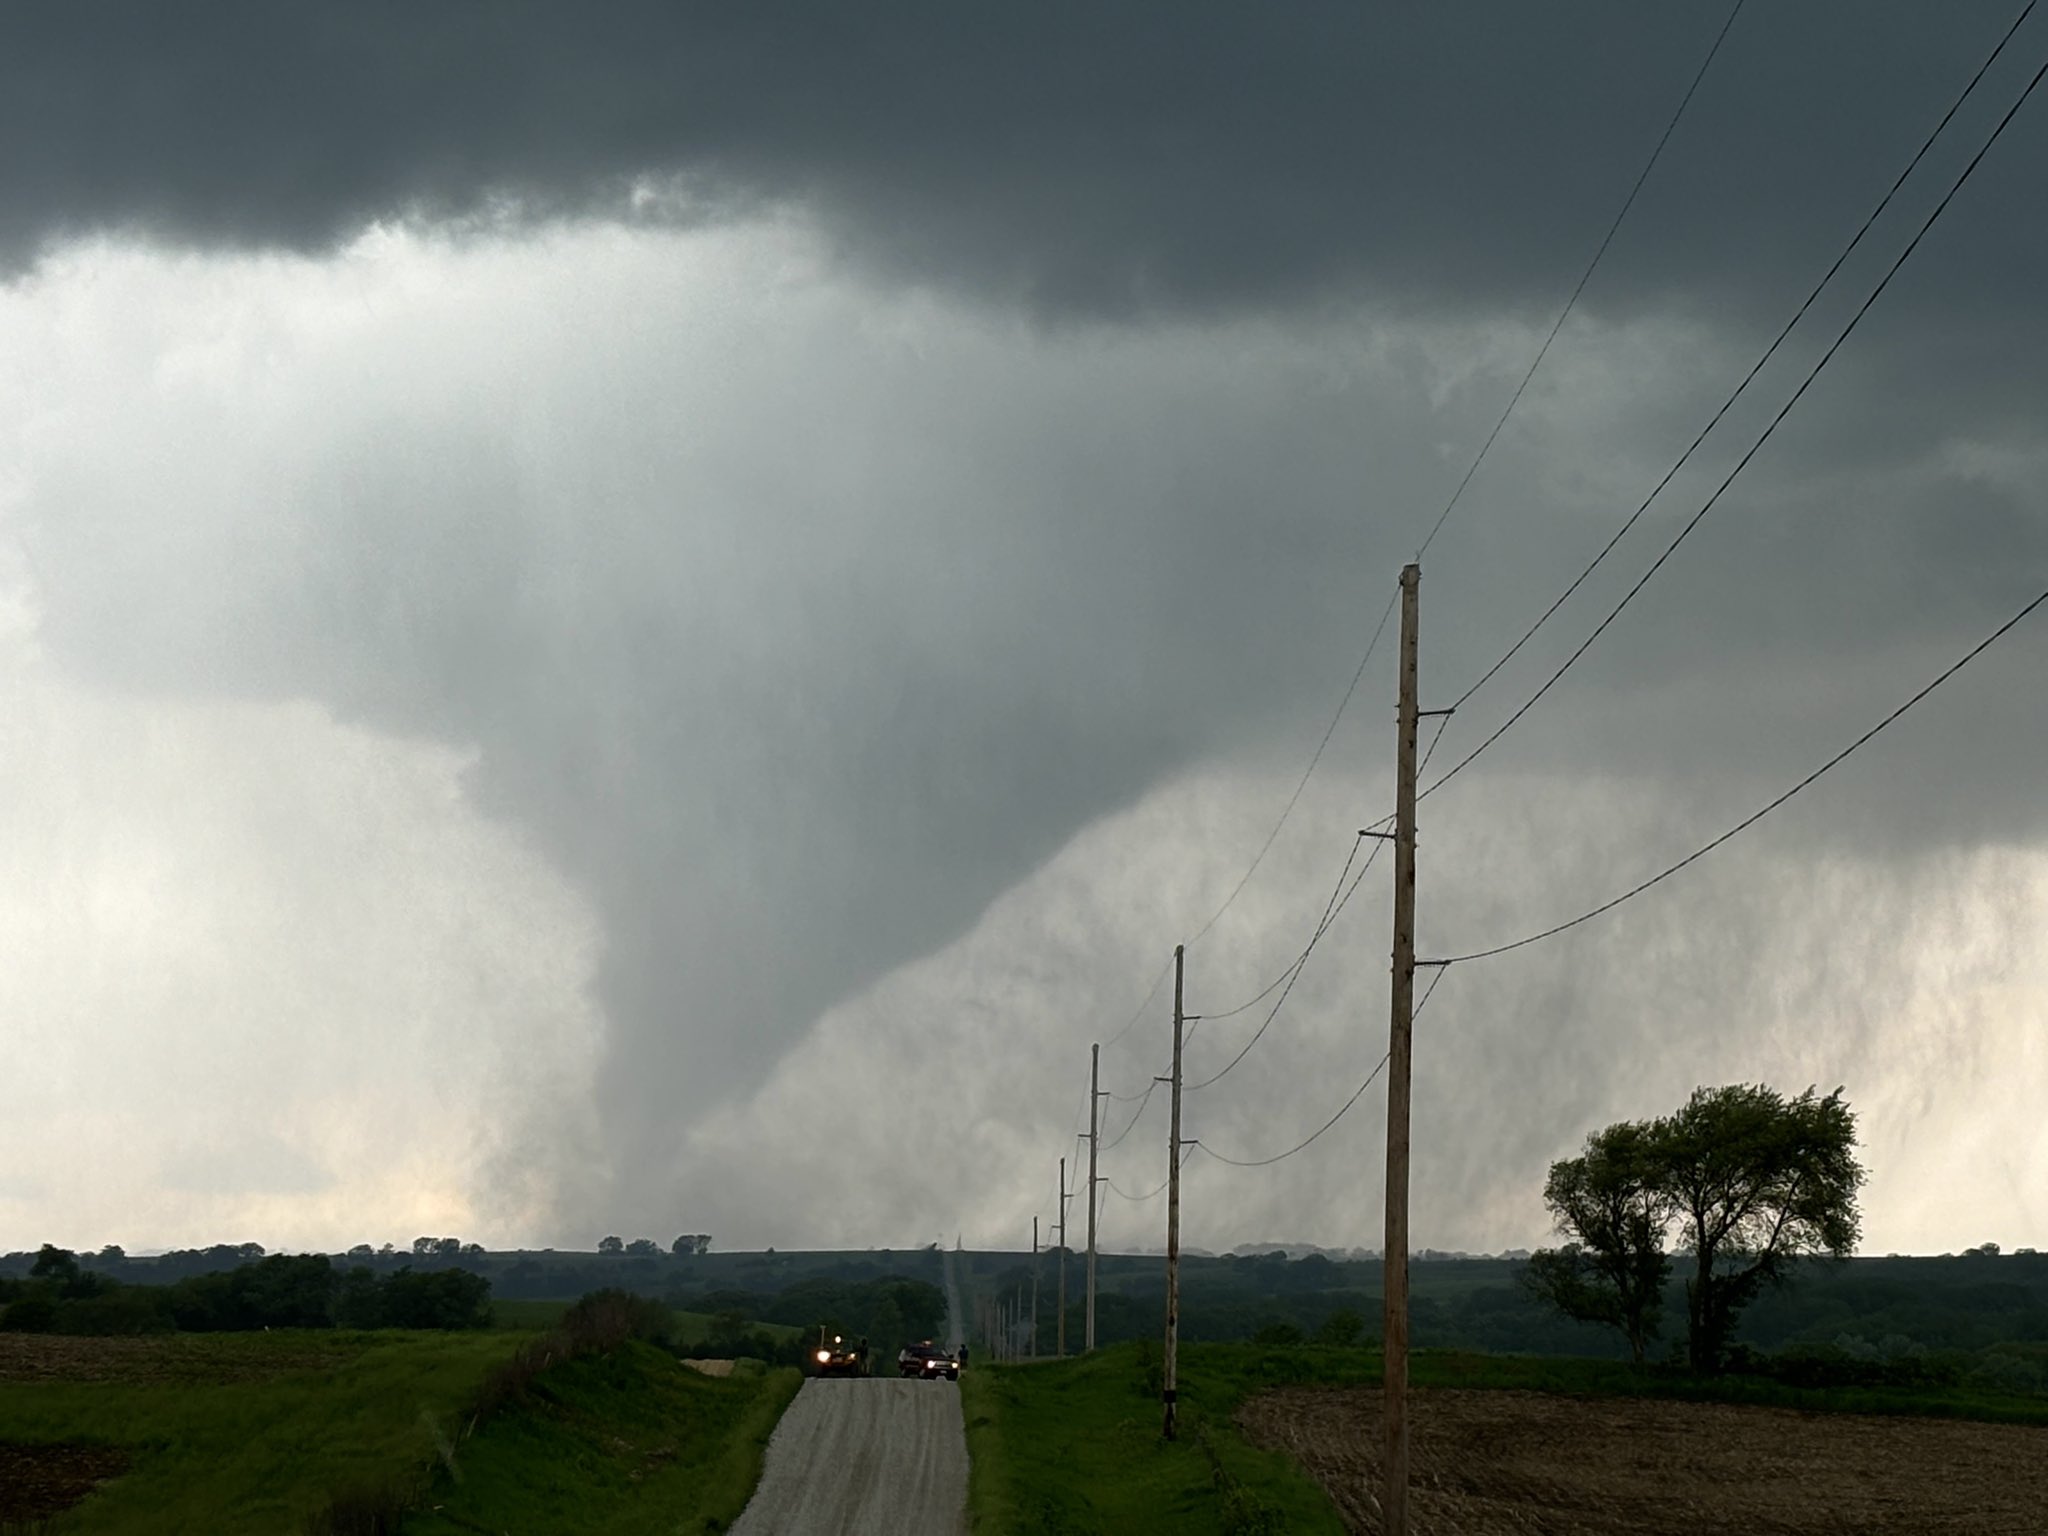 A picture of the Corning, Iowa EF1 tornado.